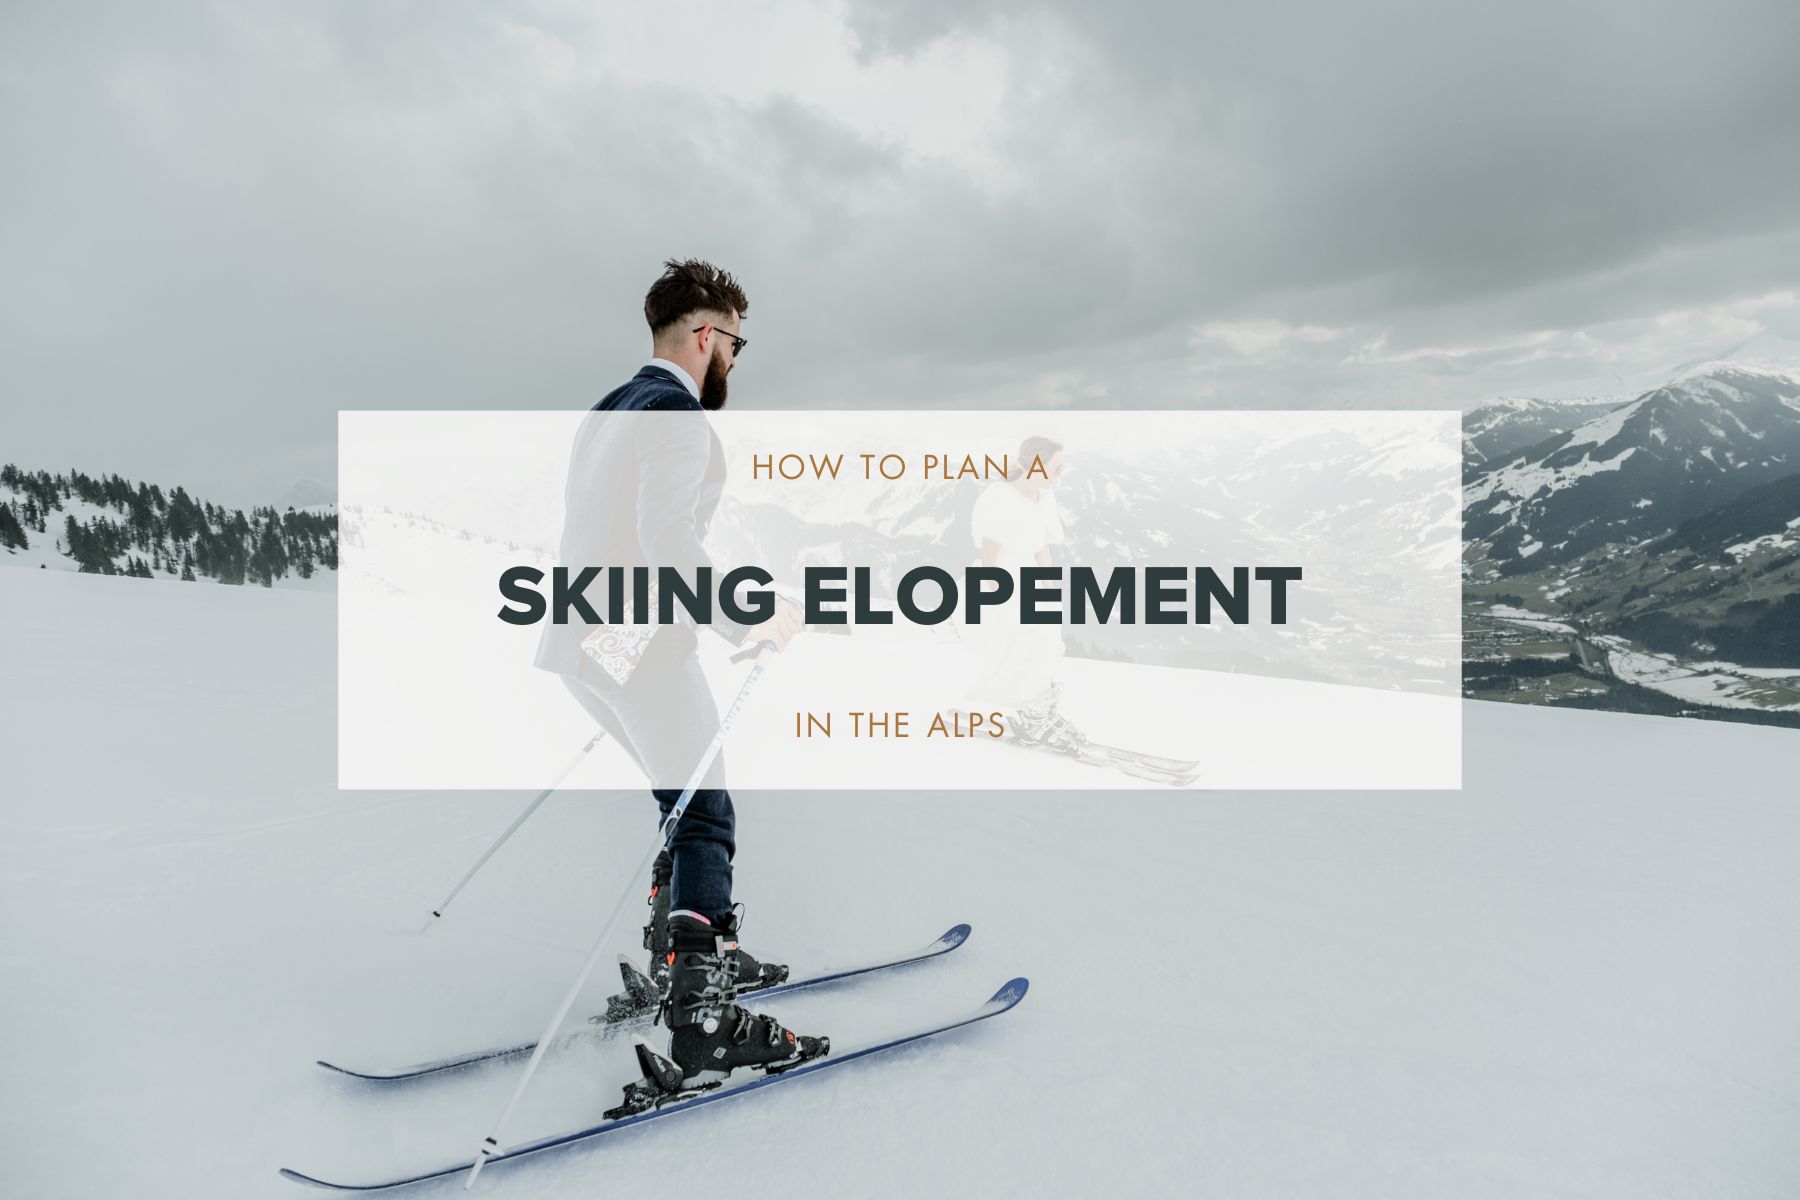 How To Plan A Skiing Elopement in the Alps